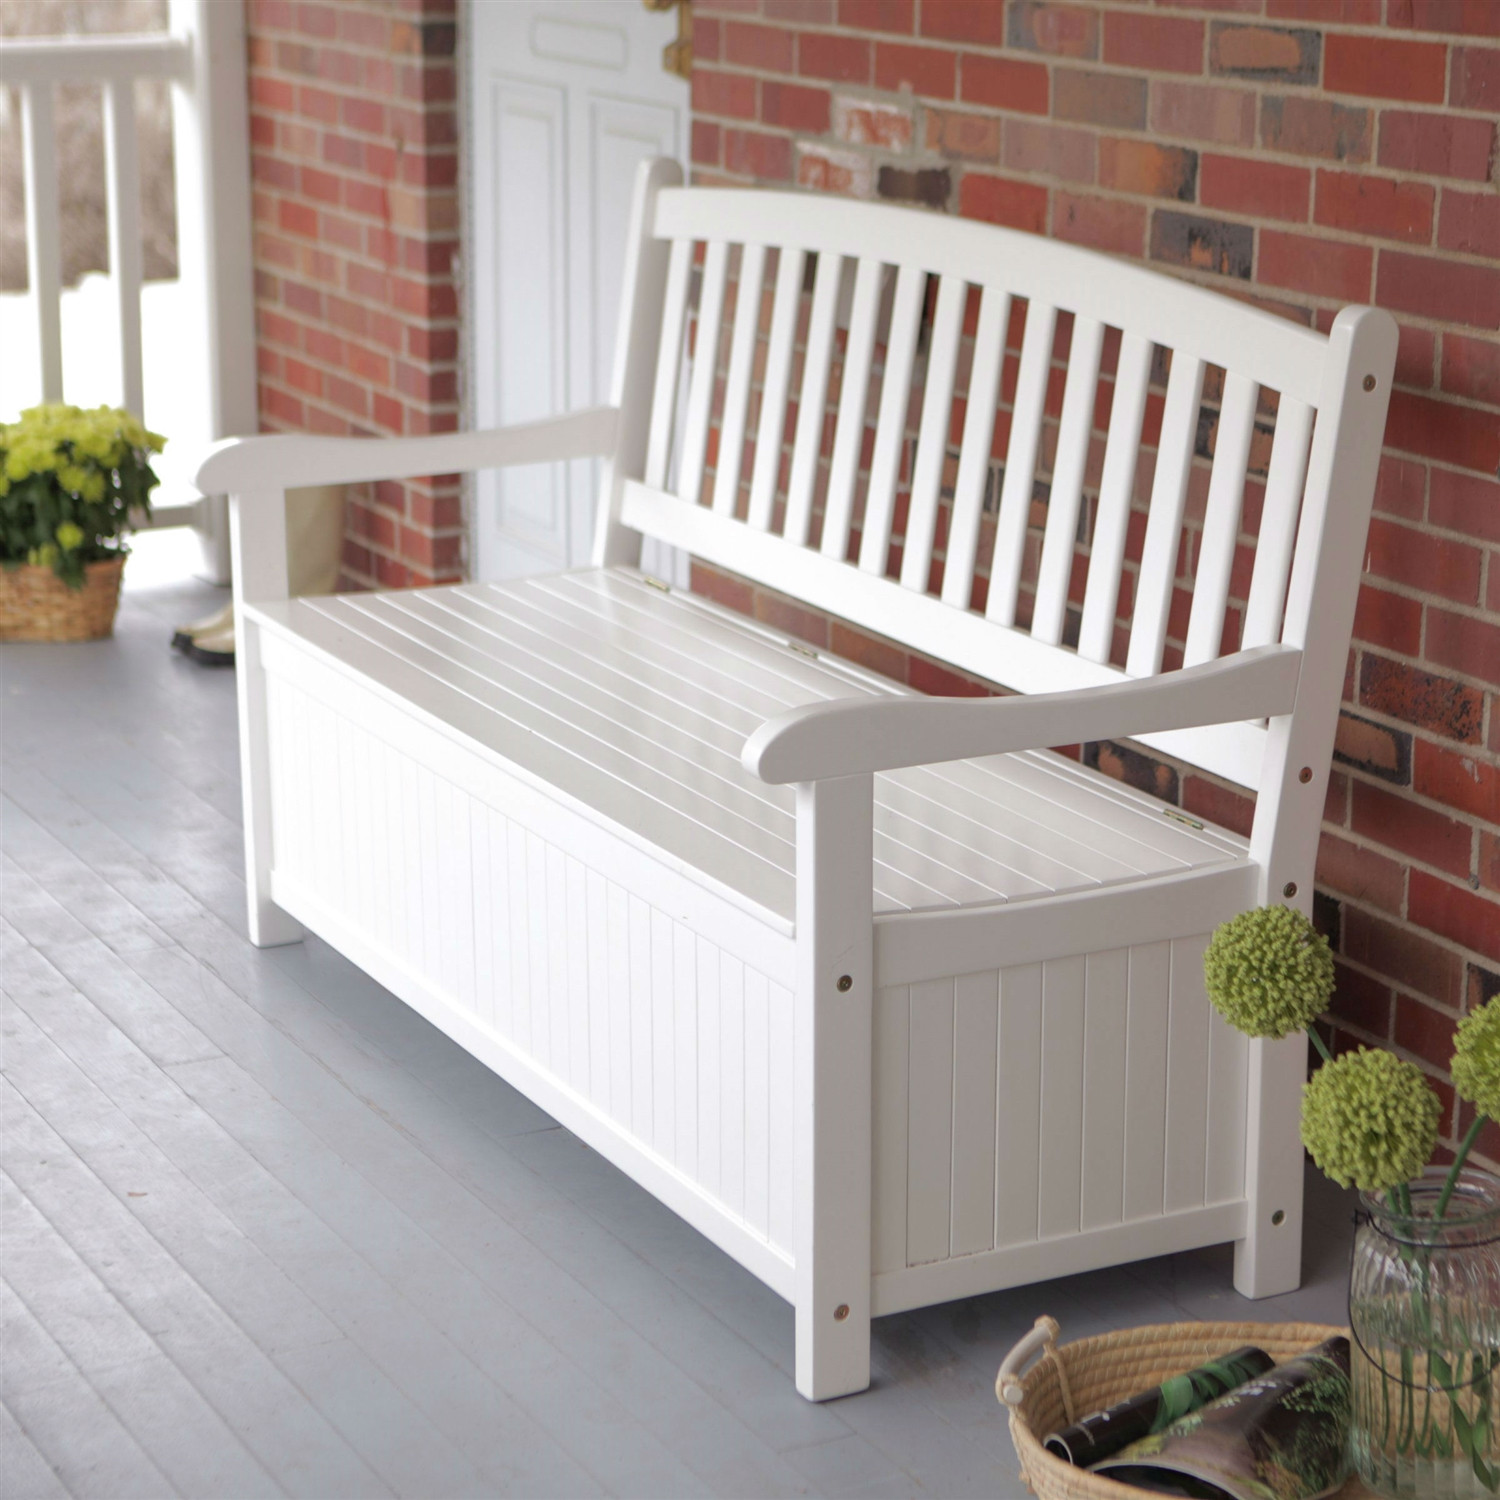 Outdoor Bench With Storage
 White Wood 4 Ft Outdoor Patio Garden Bench Deck Box with